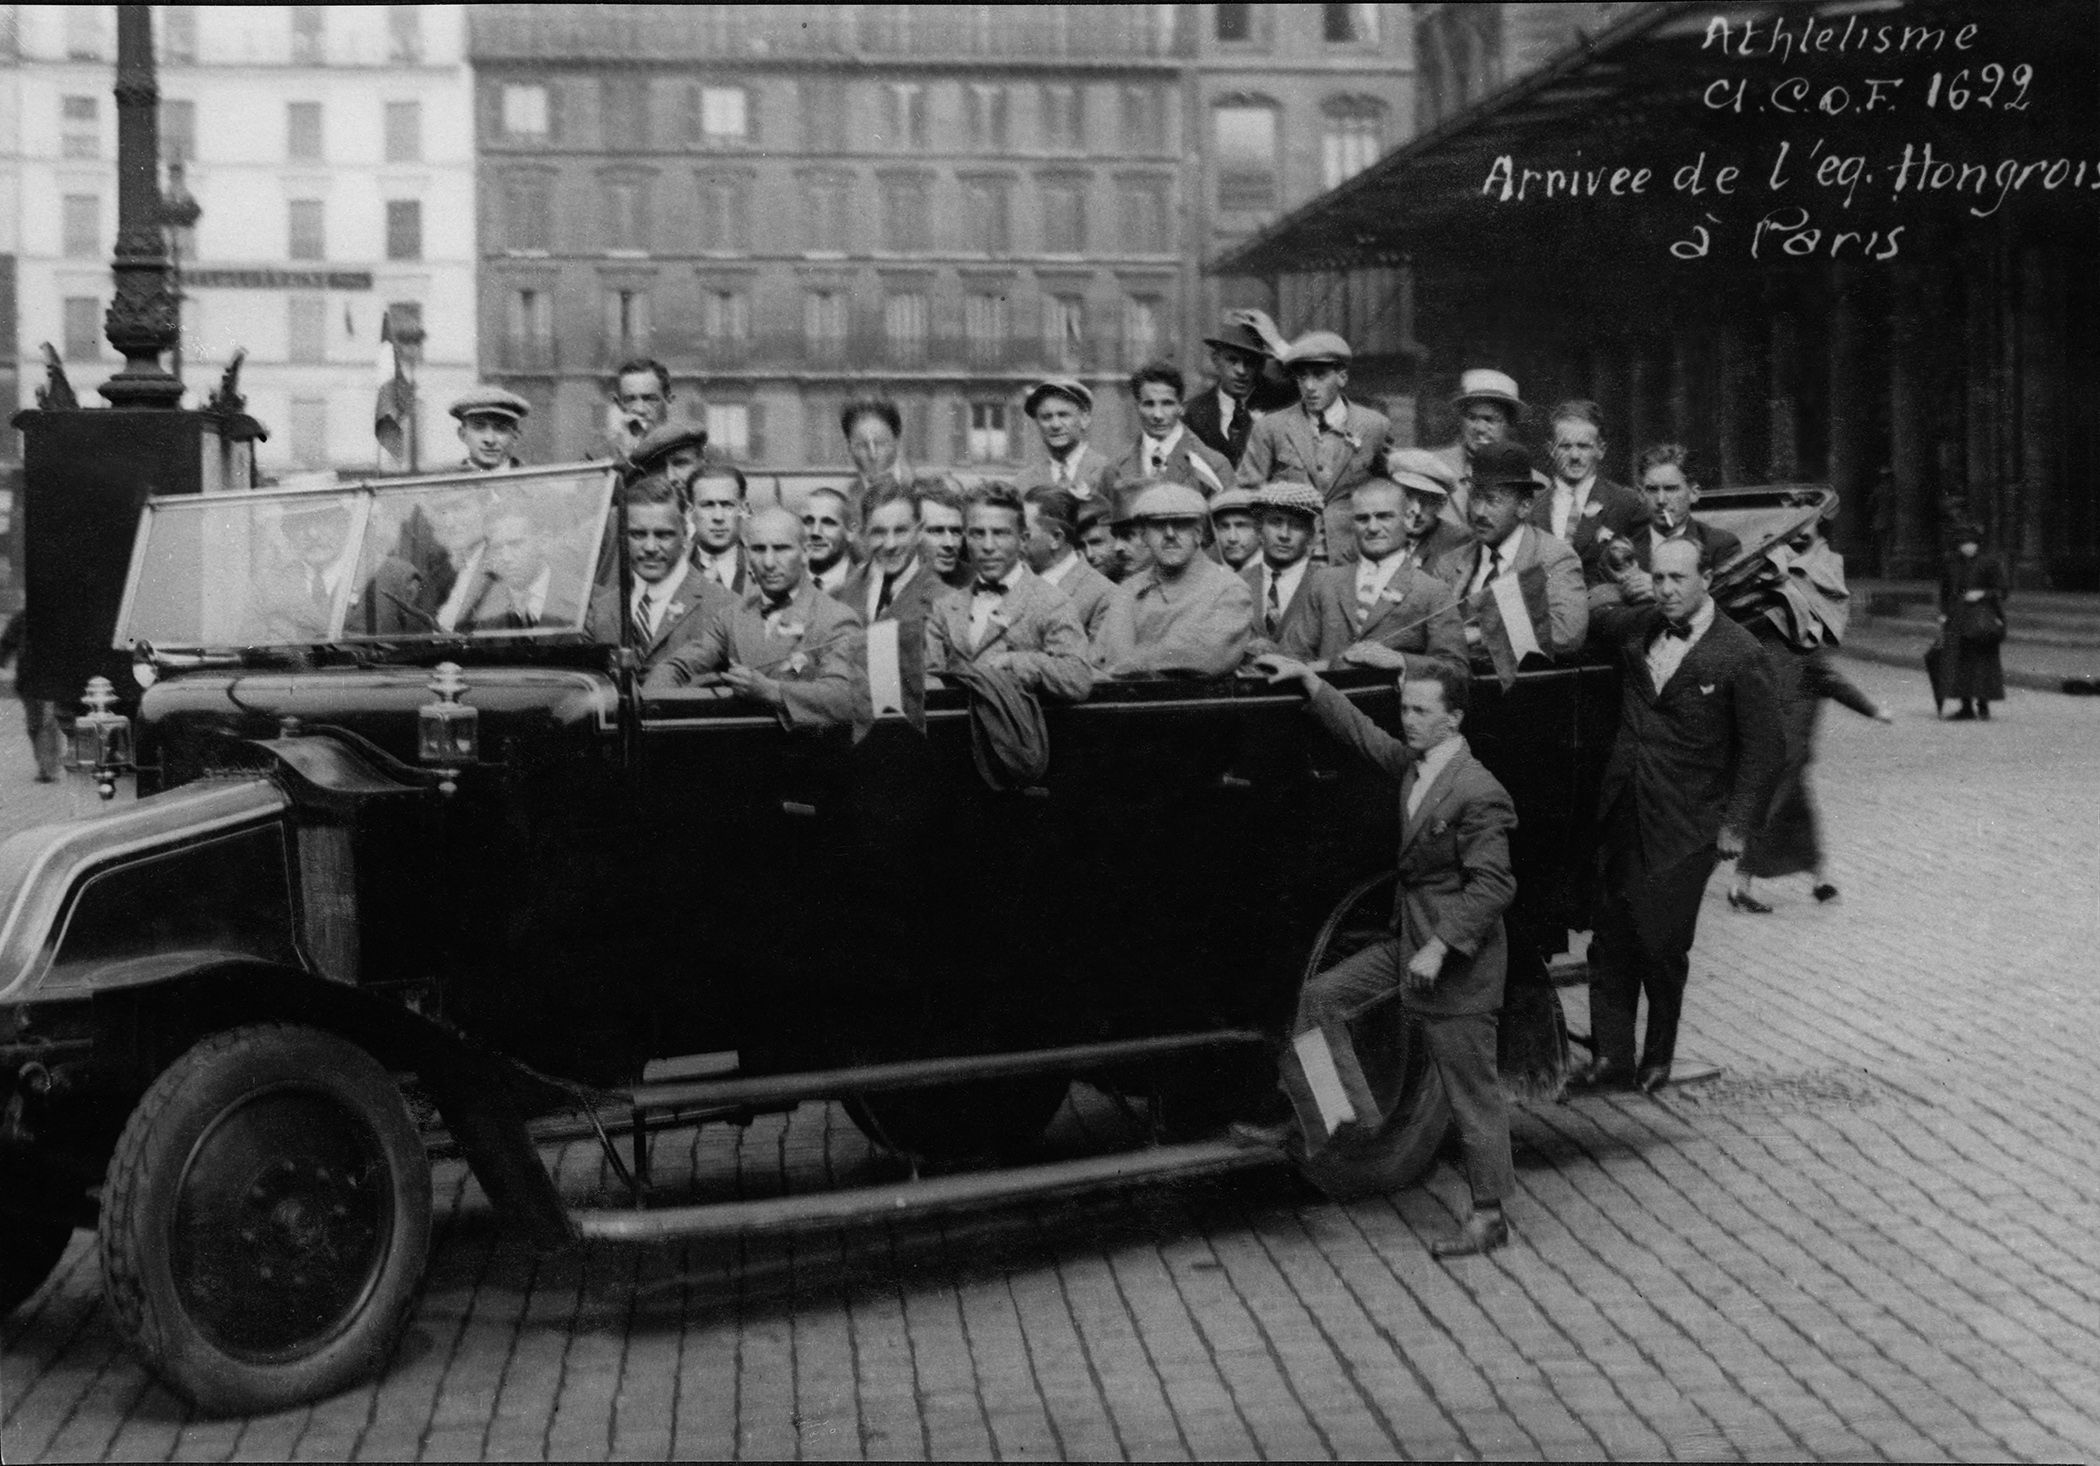 The Hungarian athletics team arrive at the Paris 1924 Olympic Games